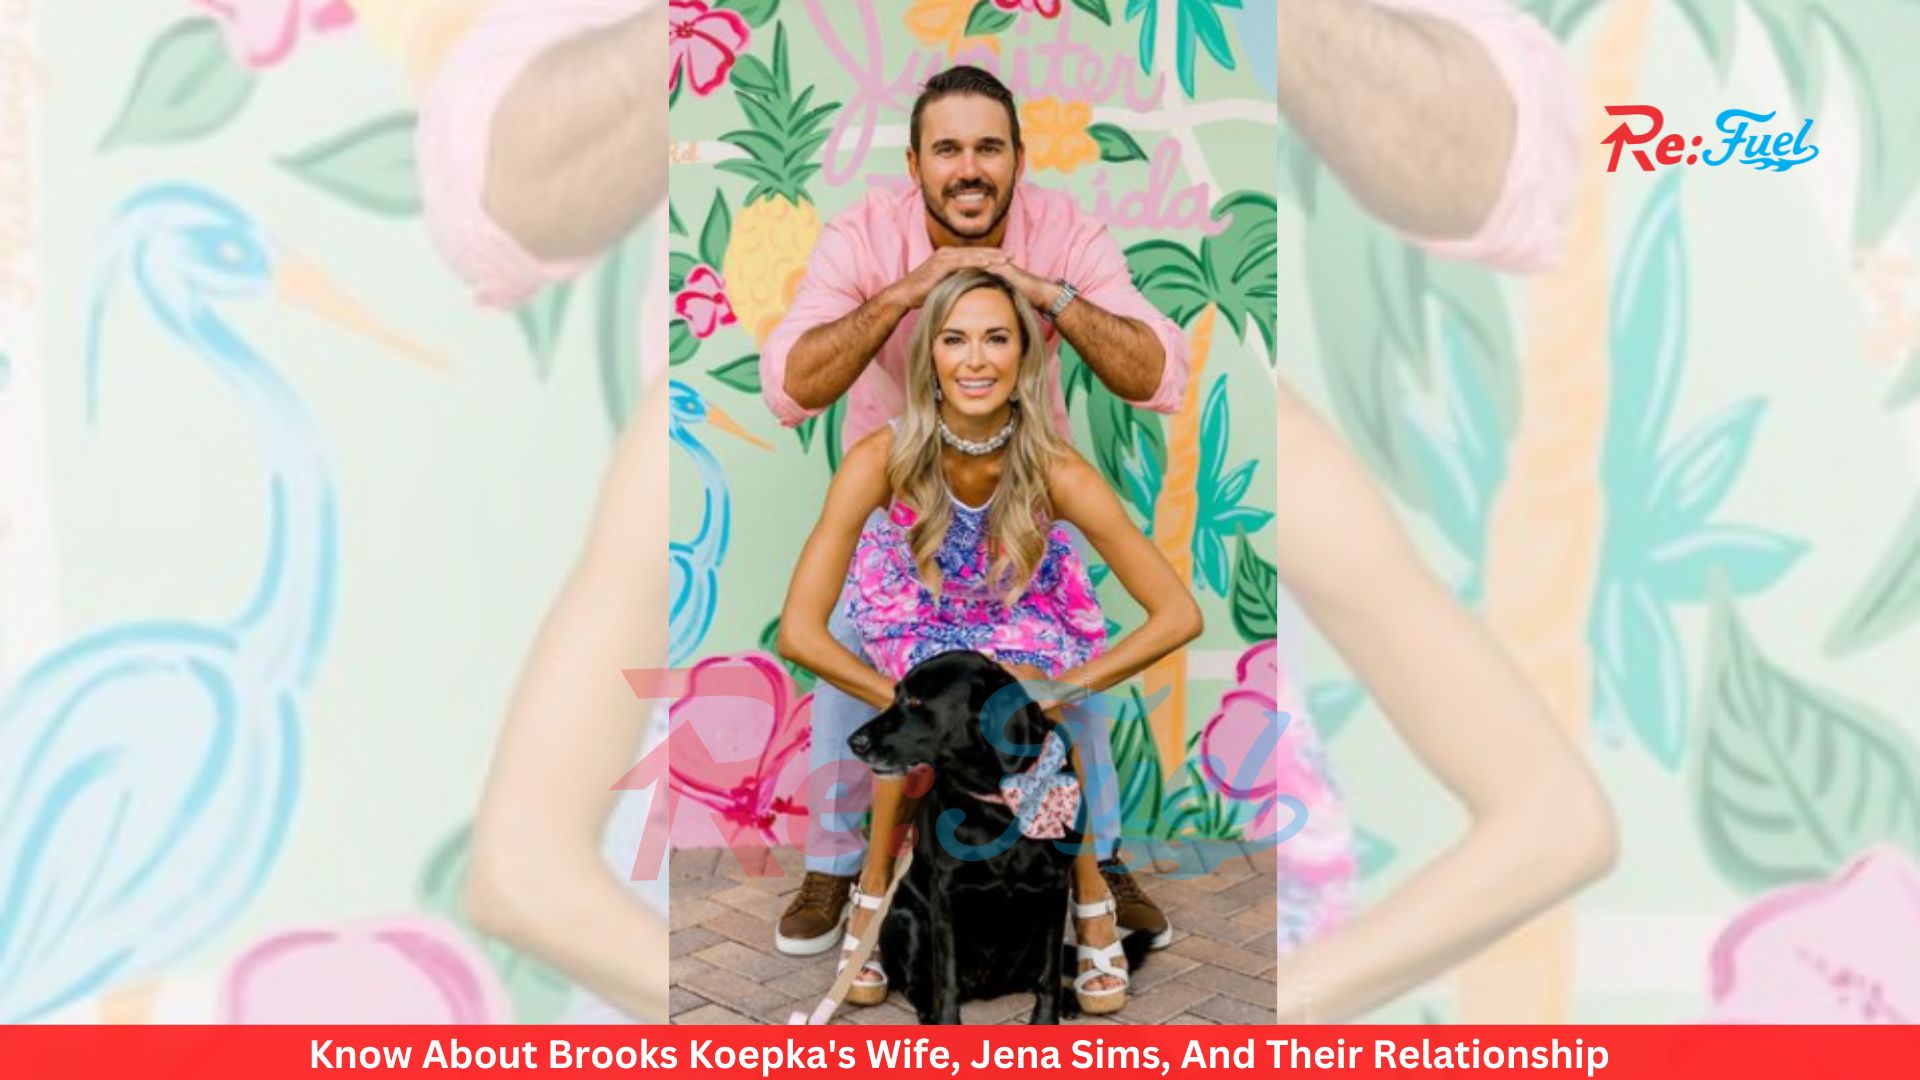 Know About Brooks Koepka's Wife, Jena Sims, And Their Relationship